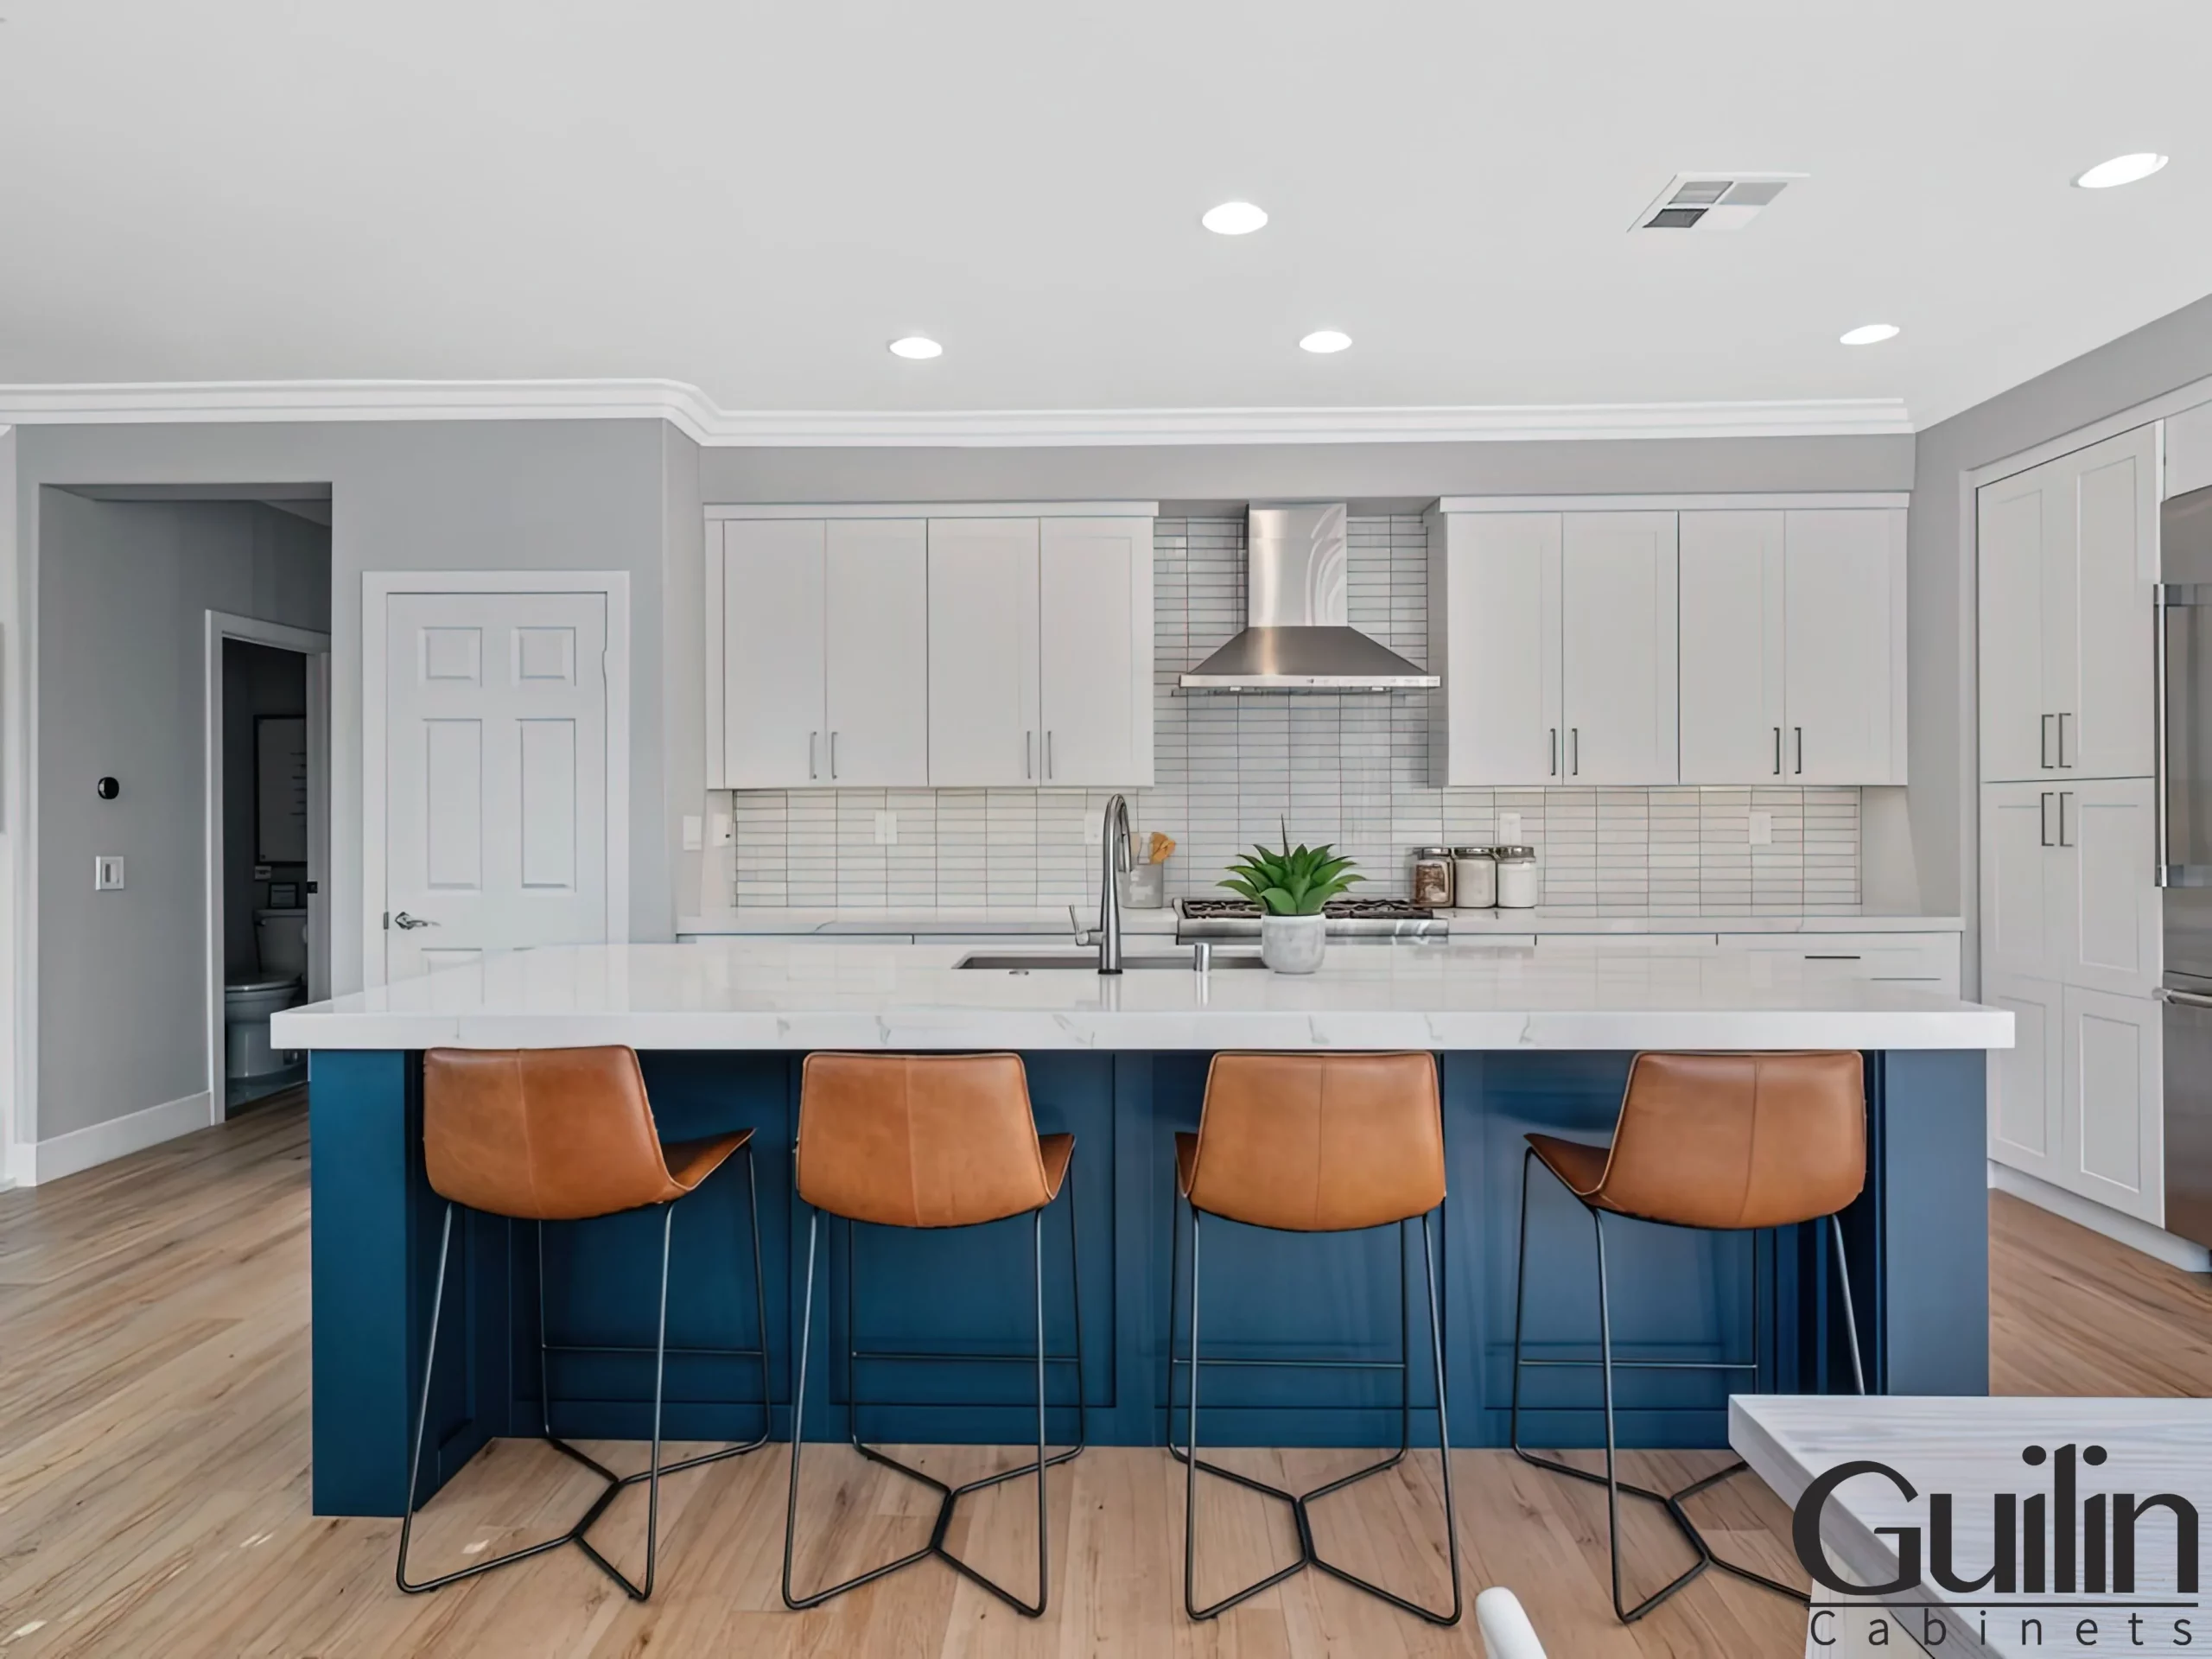 The coastal kitchen style utilizes a variety of light and natural shades, such as whites, creams, tans, and blues